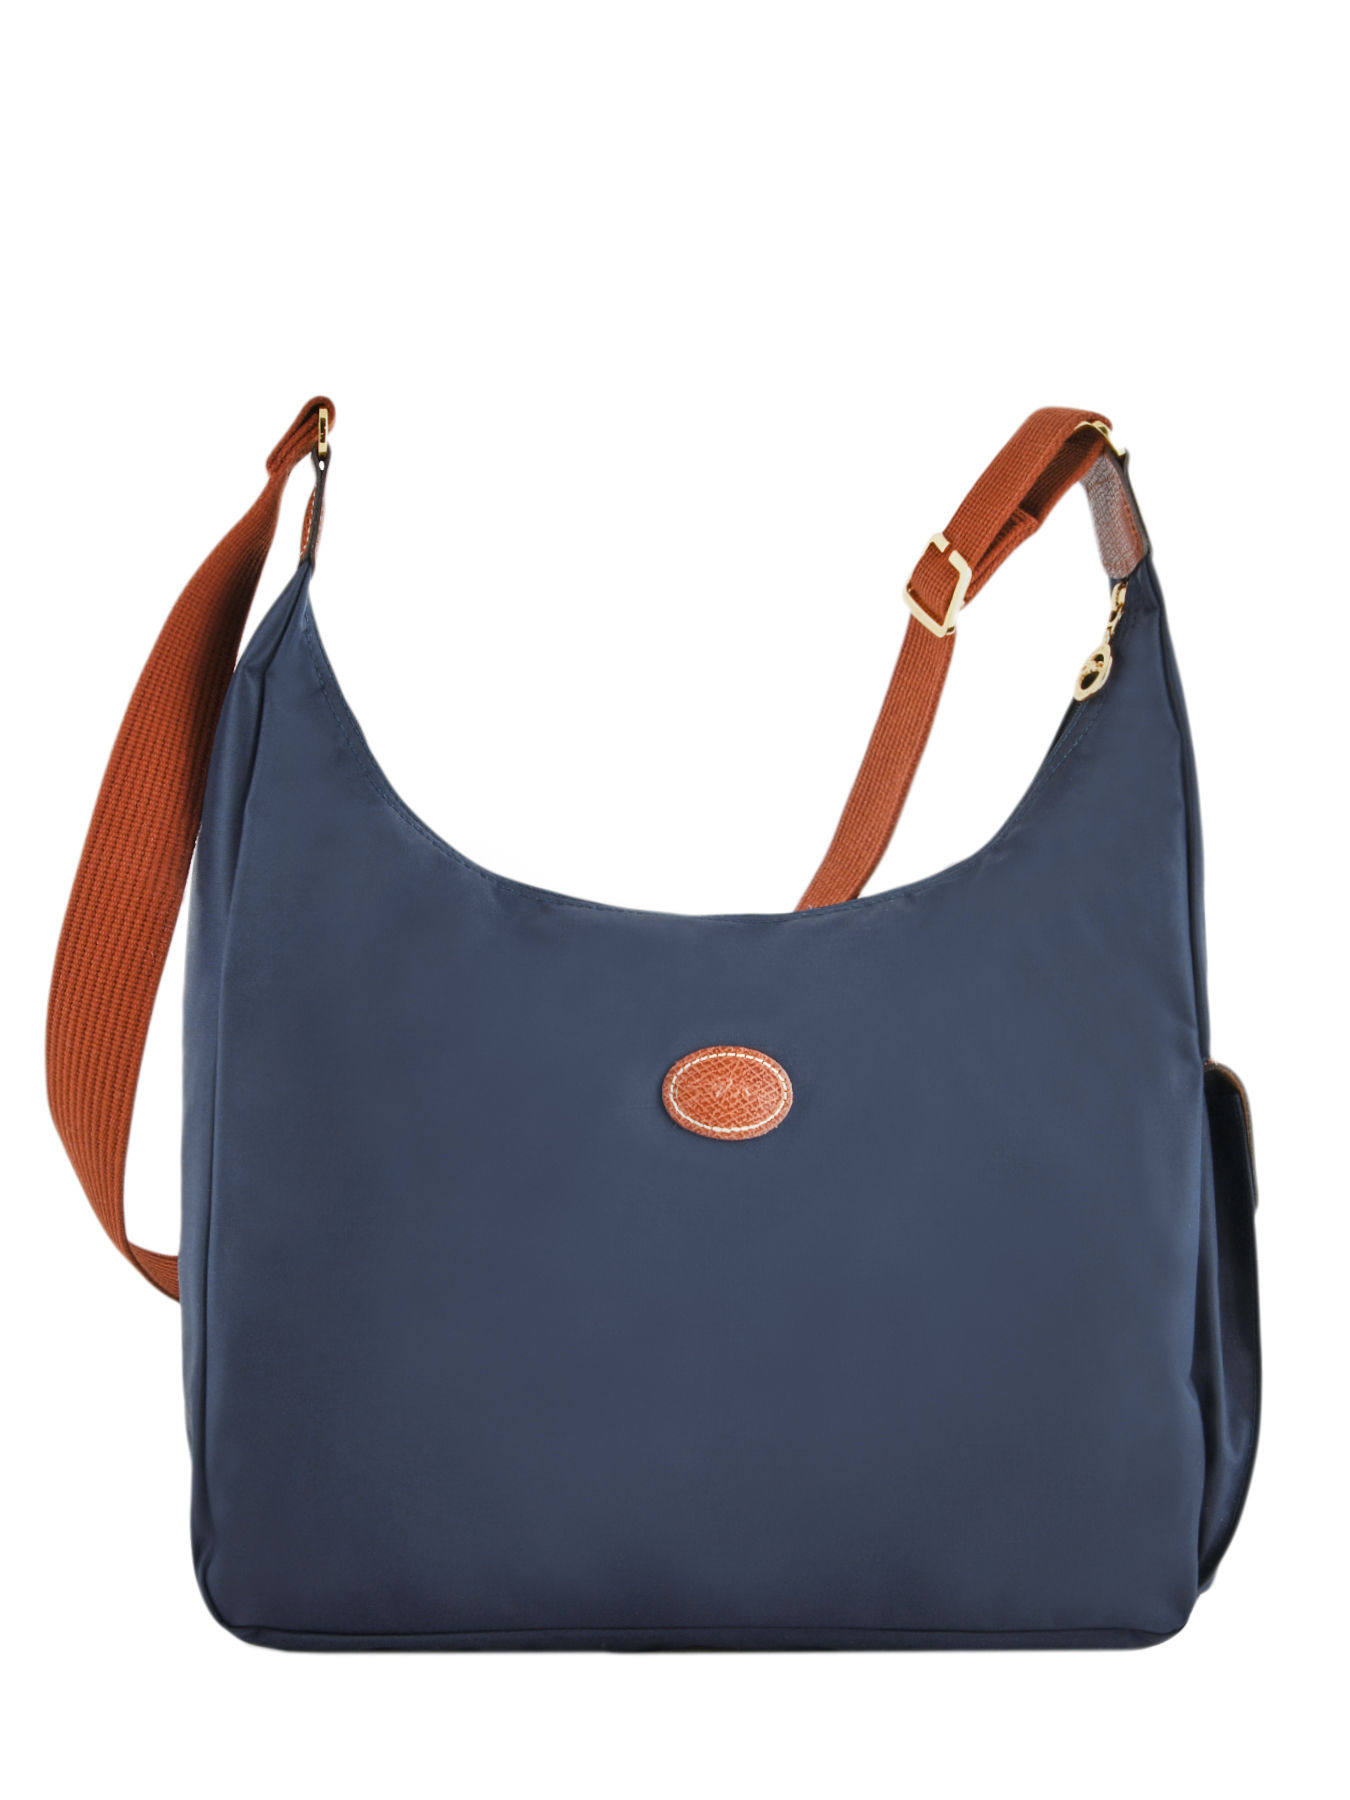 Purchase > sac femme longchamp, Up to 78% OFF